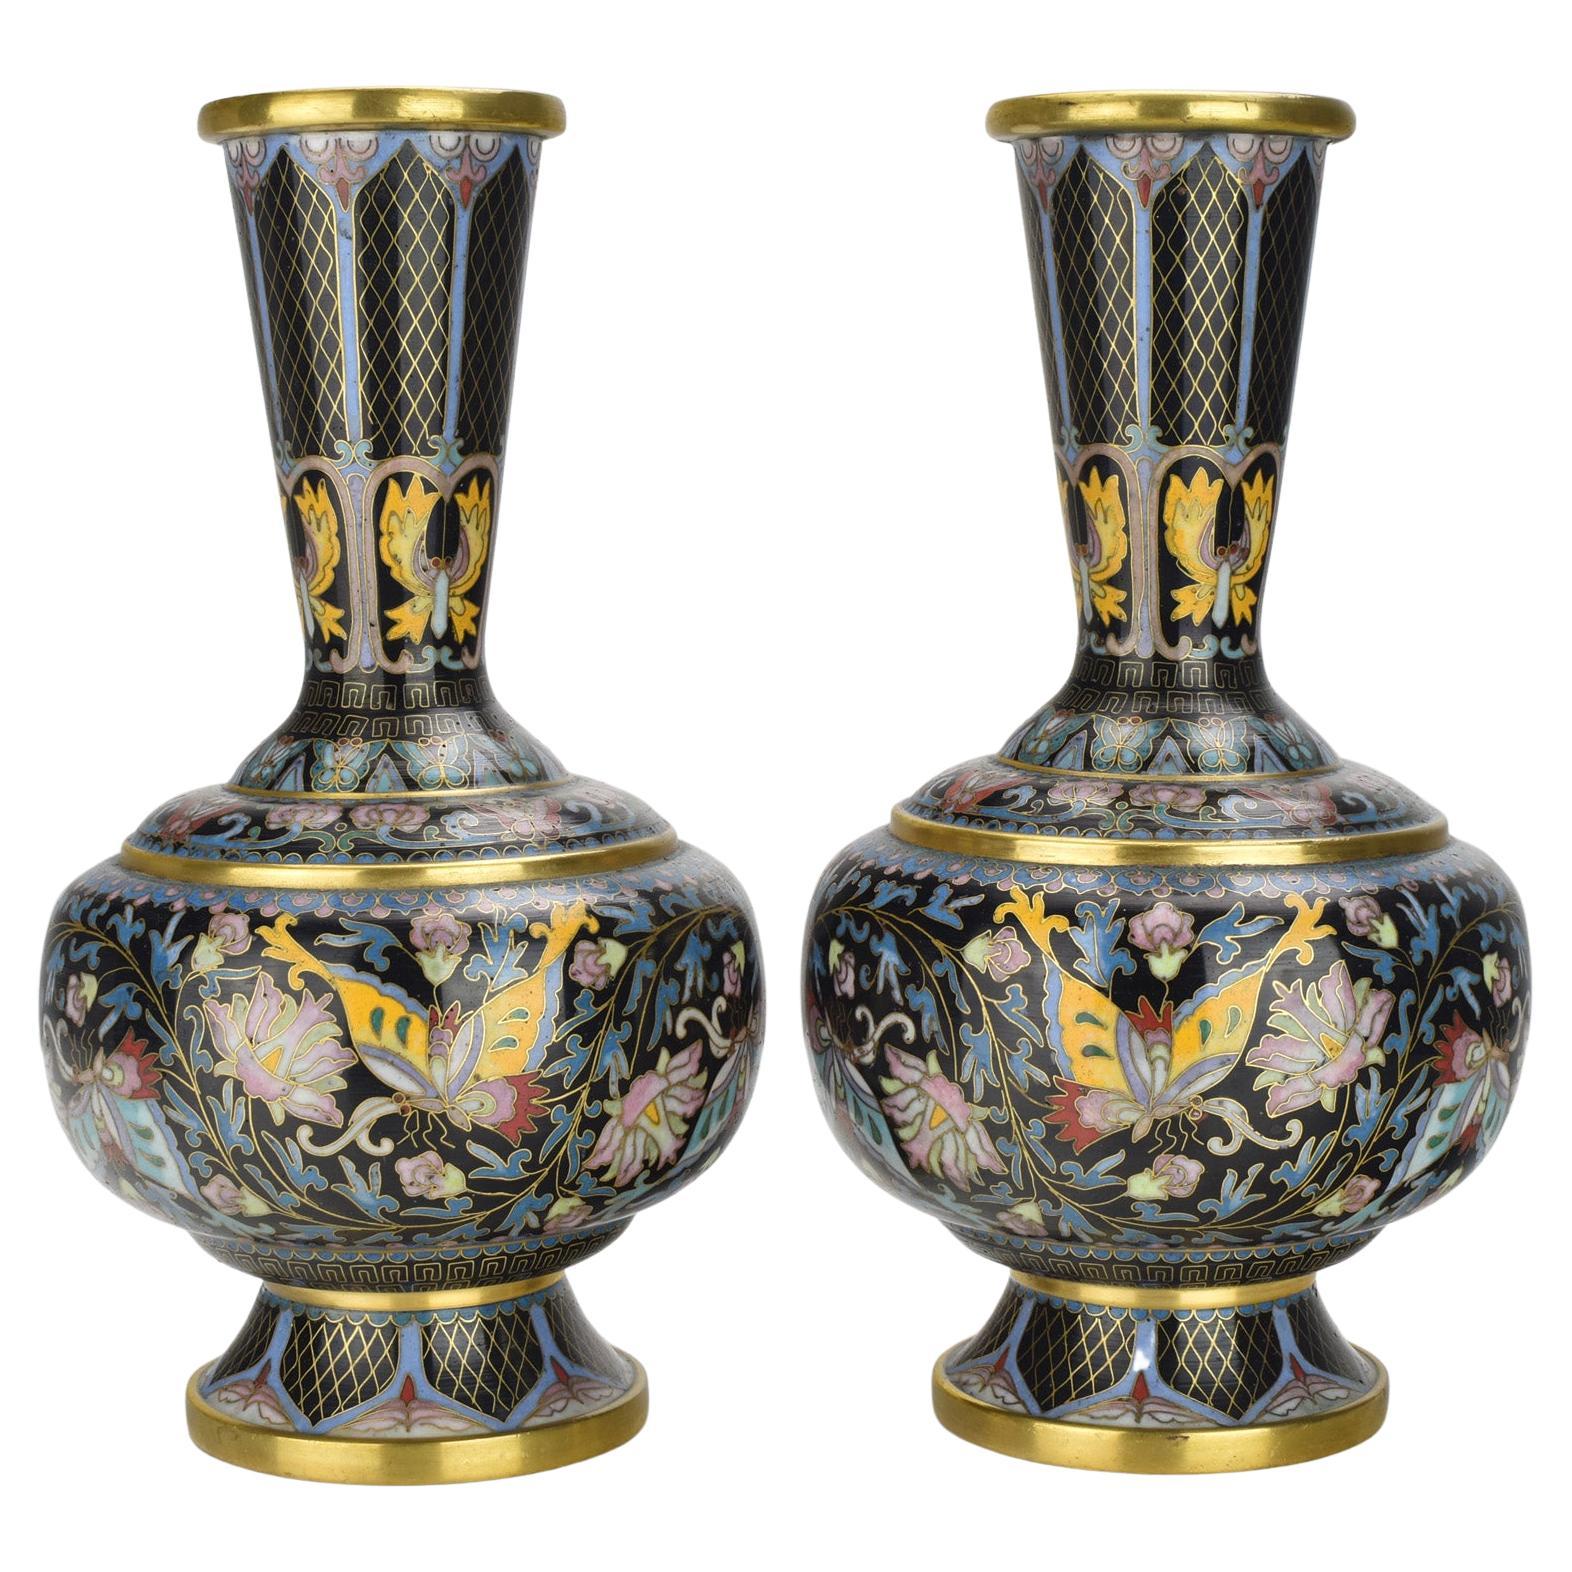 Fine Pair of Mirrored Gilt Cloisonne Enamel Butterfly Vases China